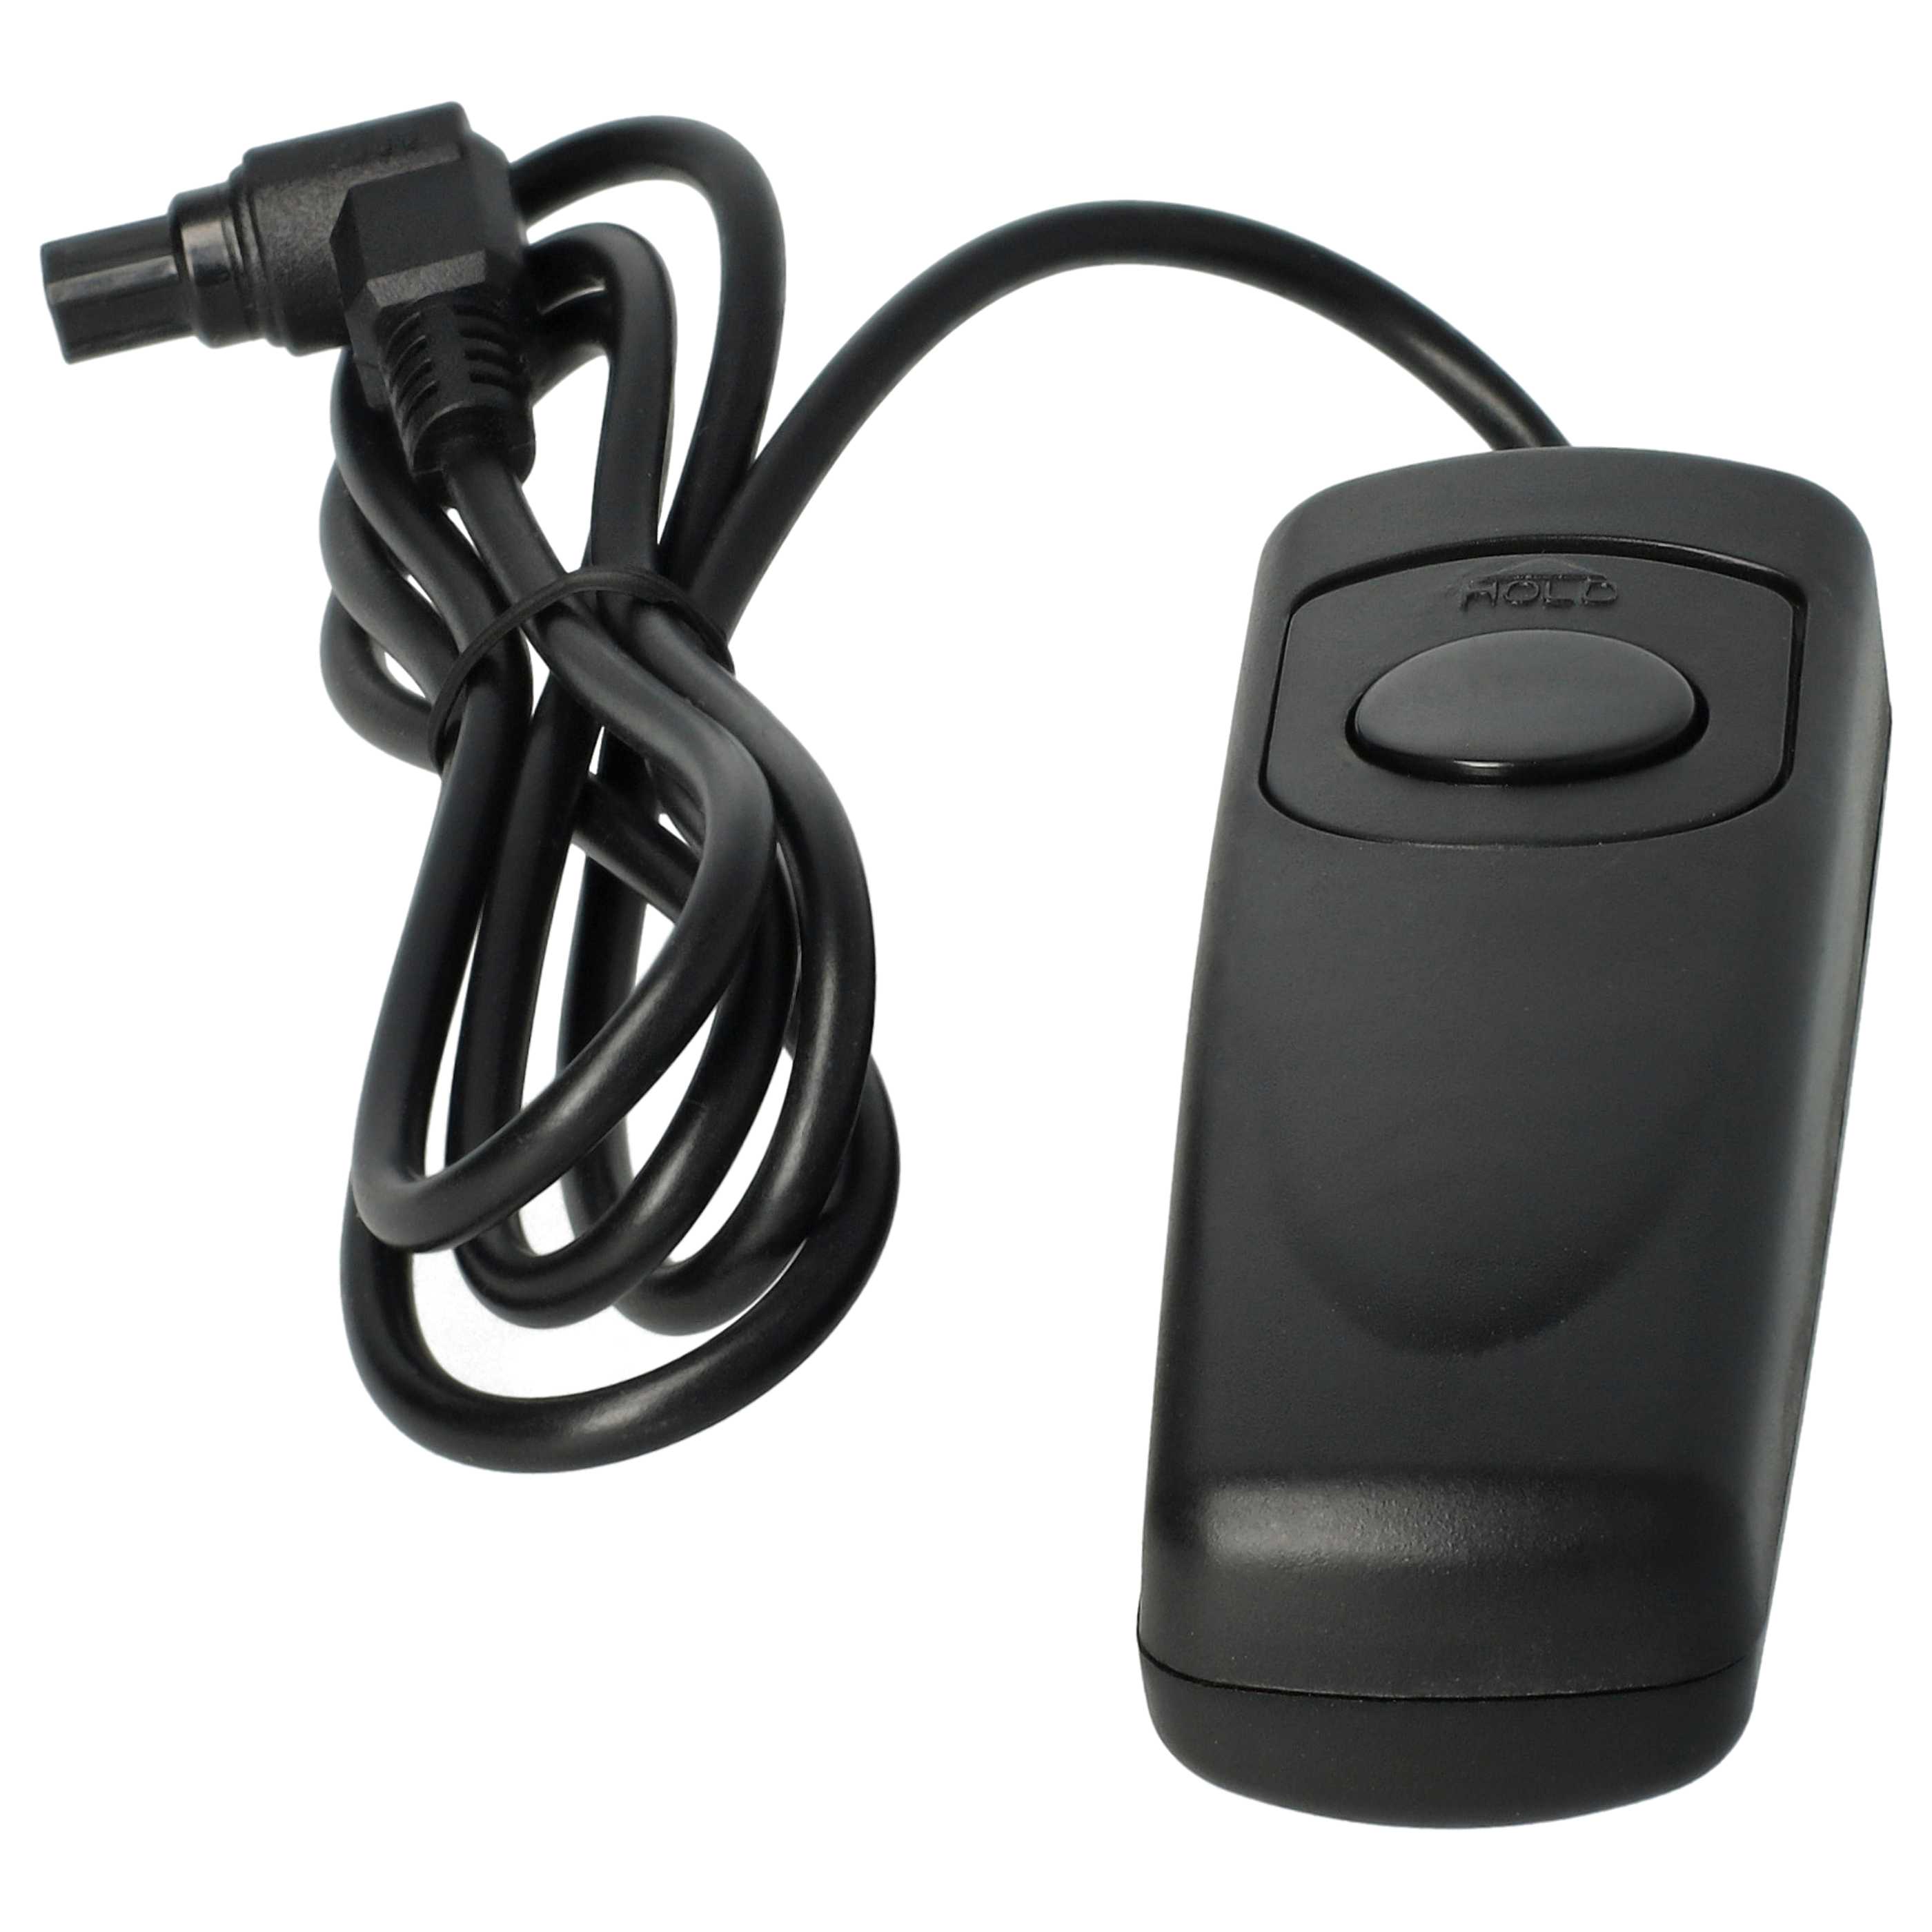 Remote Trigger as Exchange for Canon RS-80N3 for Camera 2-Step Shutter, 1 m Lead